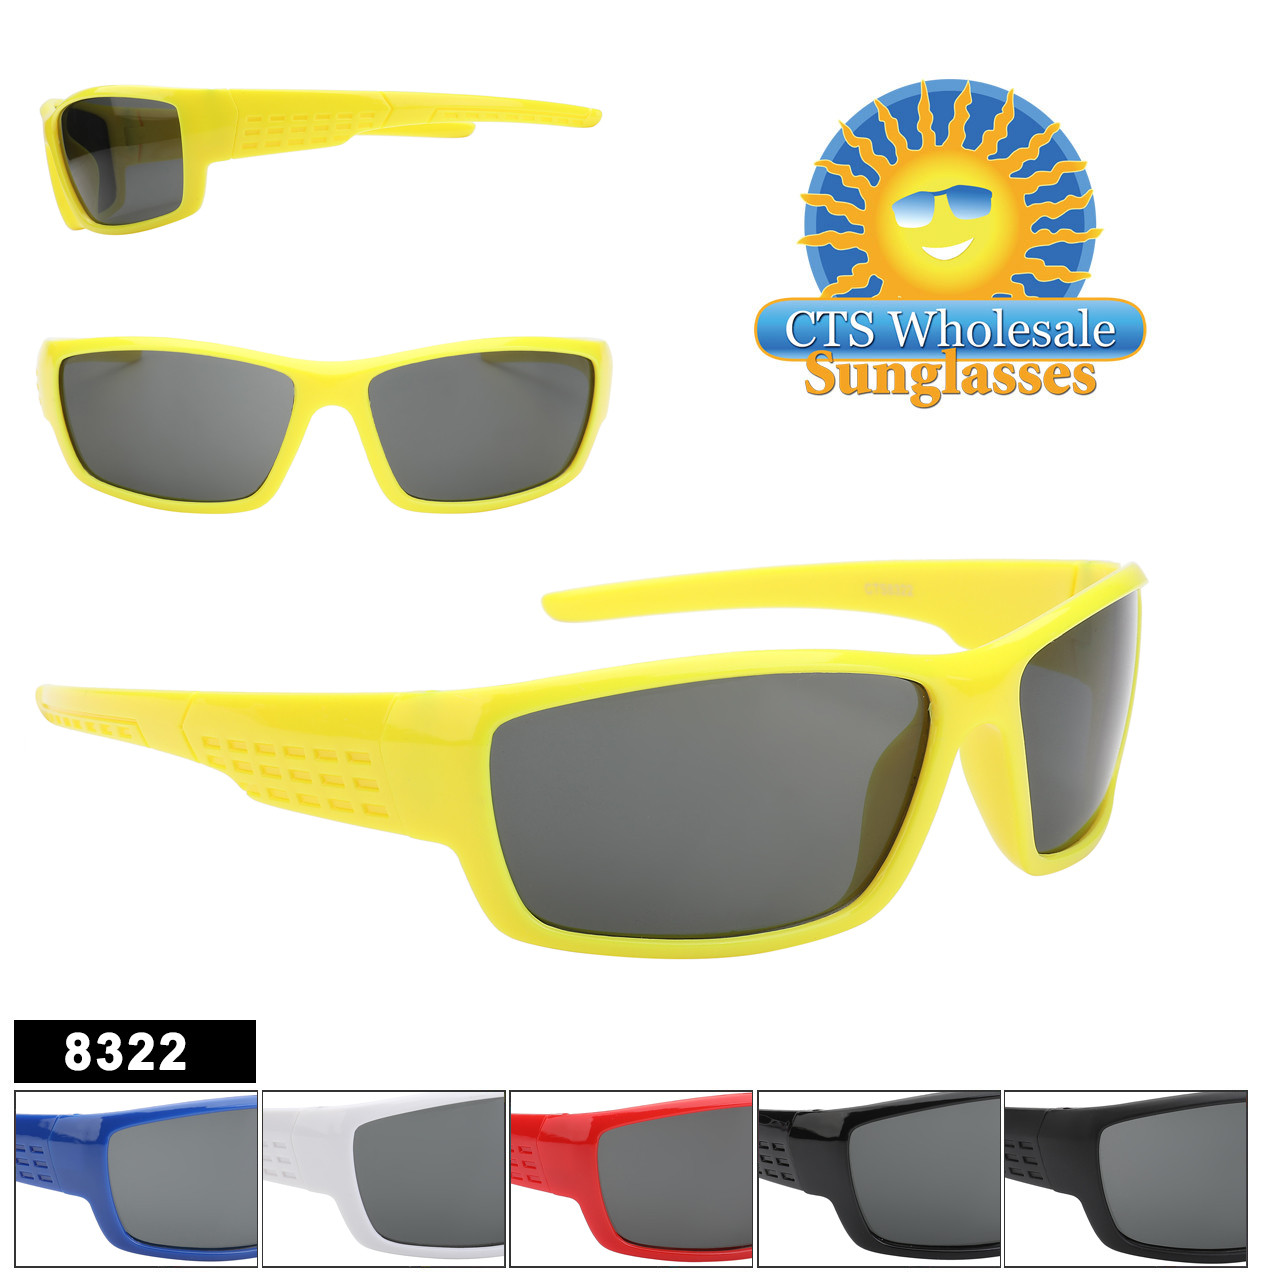 Sleek Sporty Kids style Sunglasses!  Comes in 6 great colors!